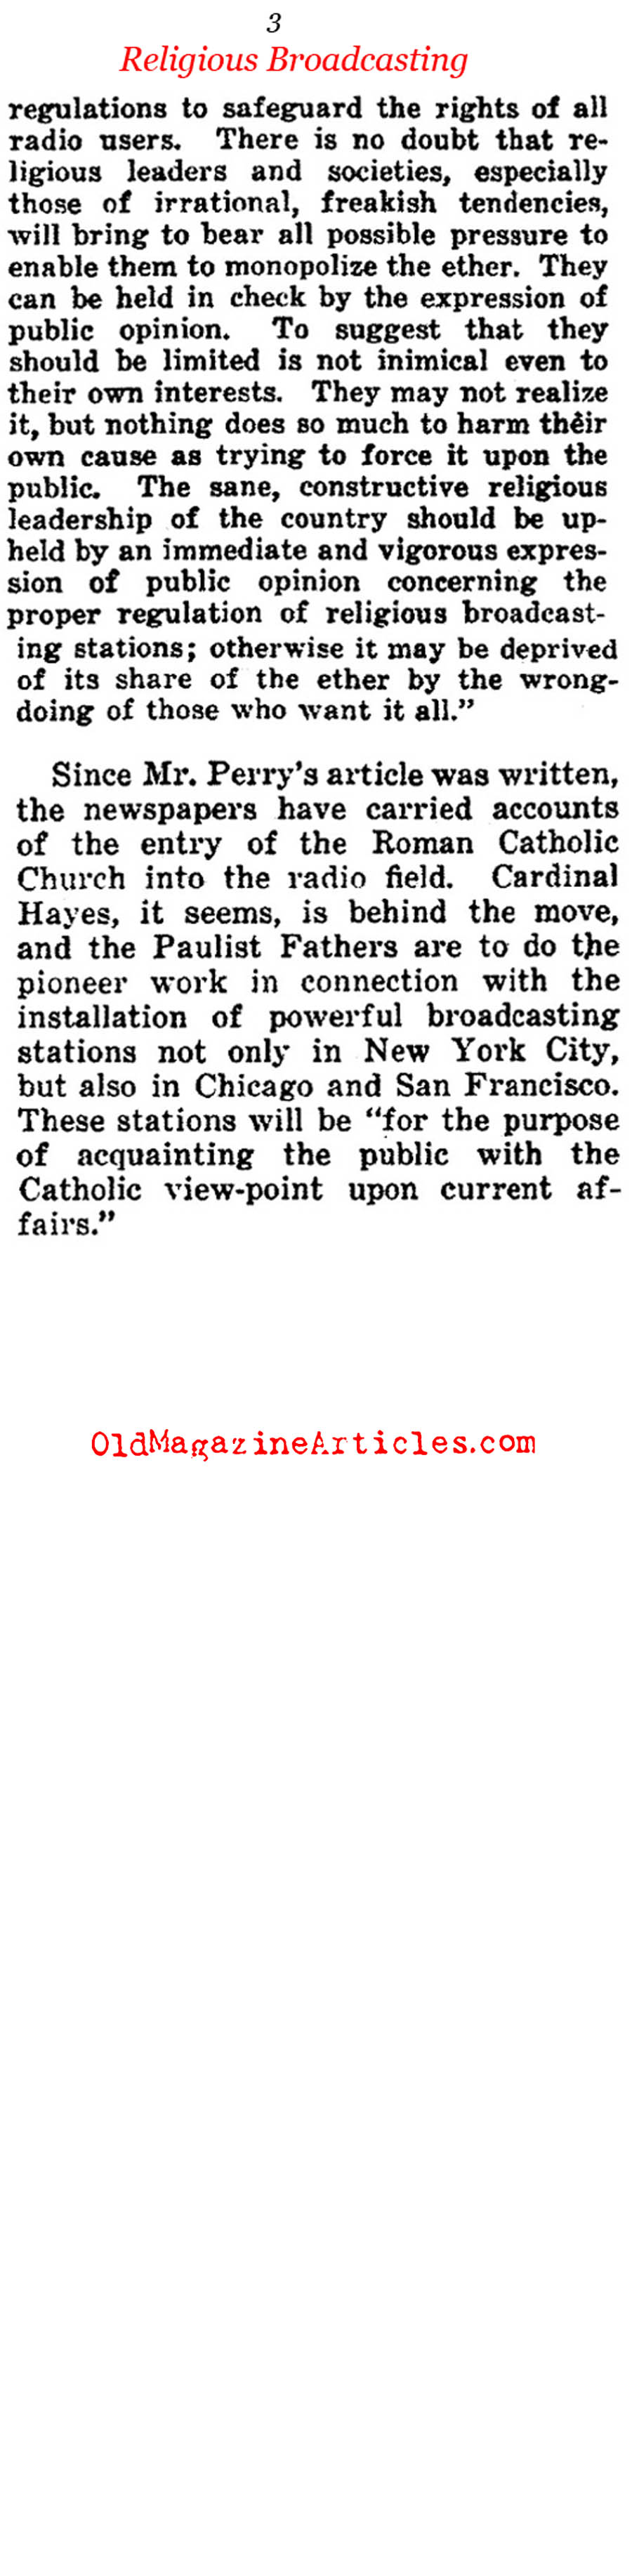 Christian Radio Broadcasting Begins in Earnest (Current Opinion, 1925)